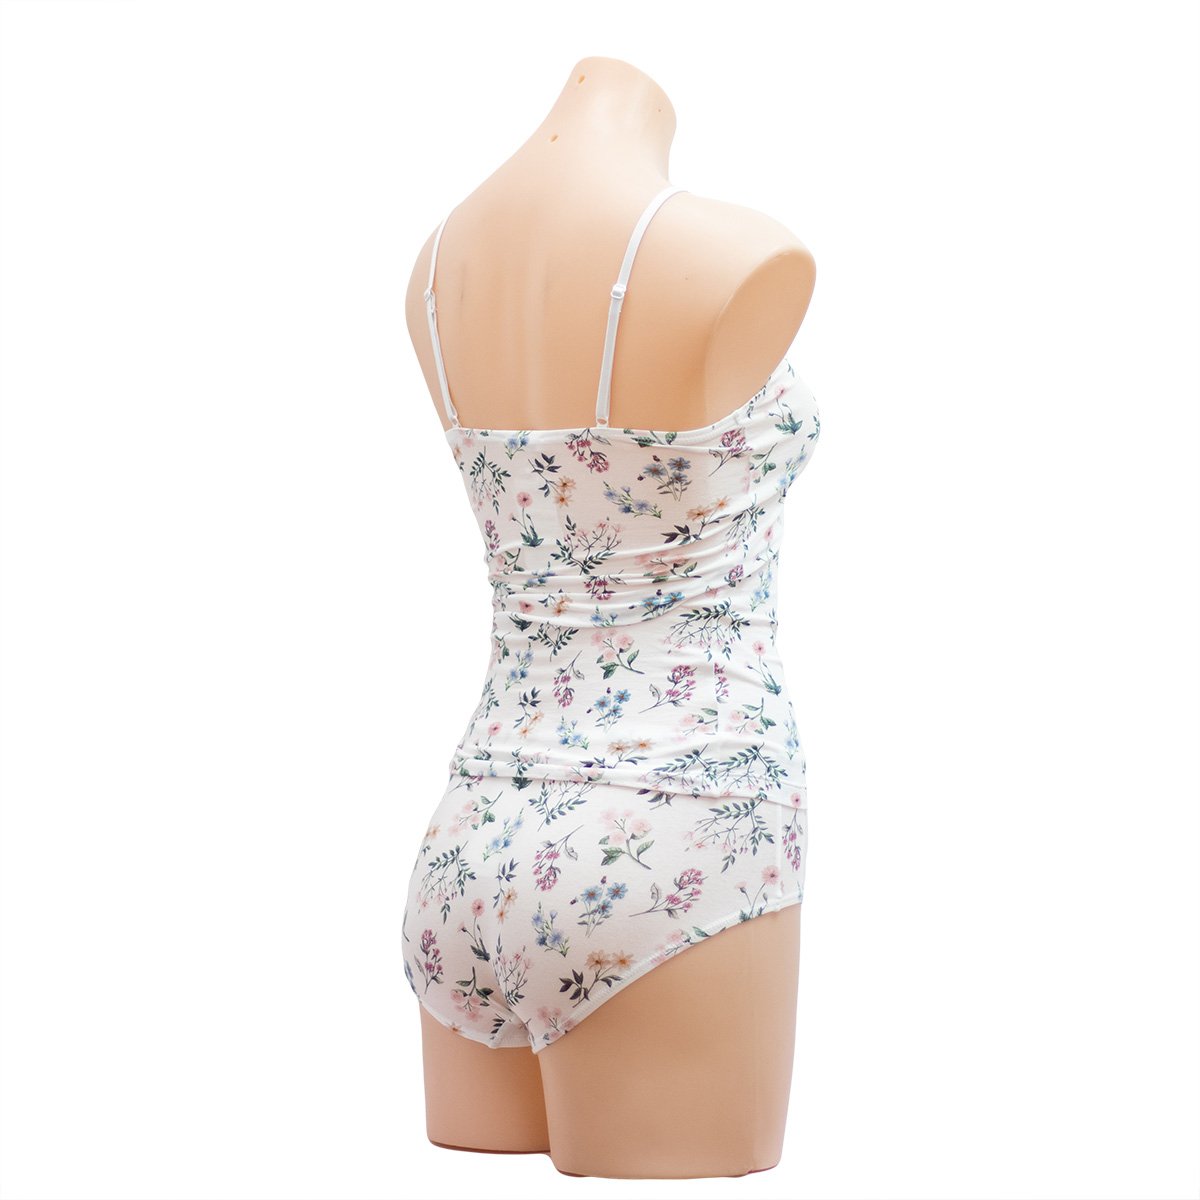 Love & Lustre Anneliese Camisole - Singlets & Tanks  Available at Illusions Lingerie